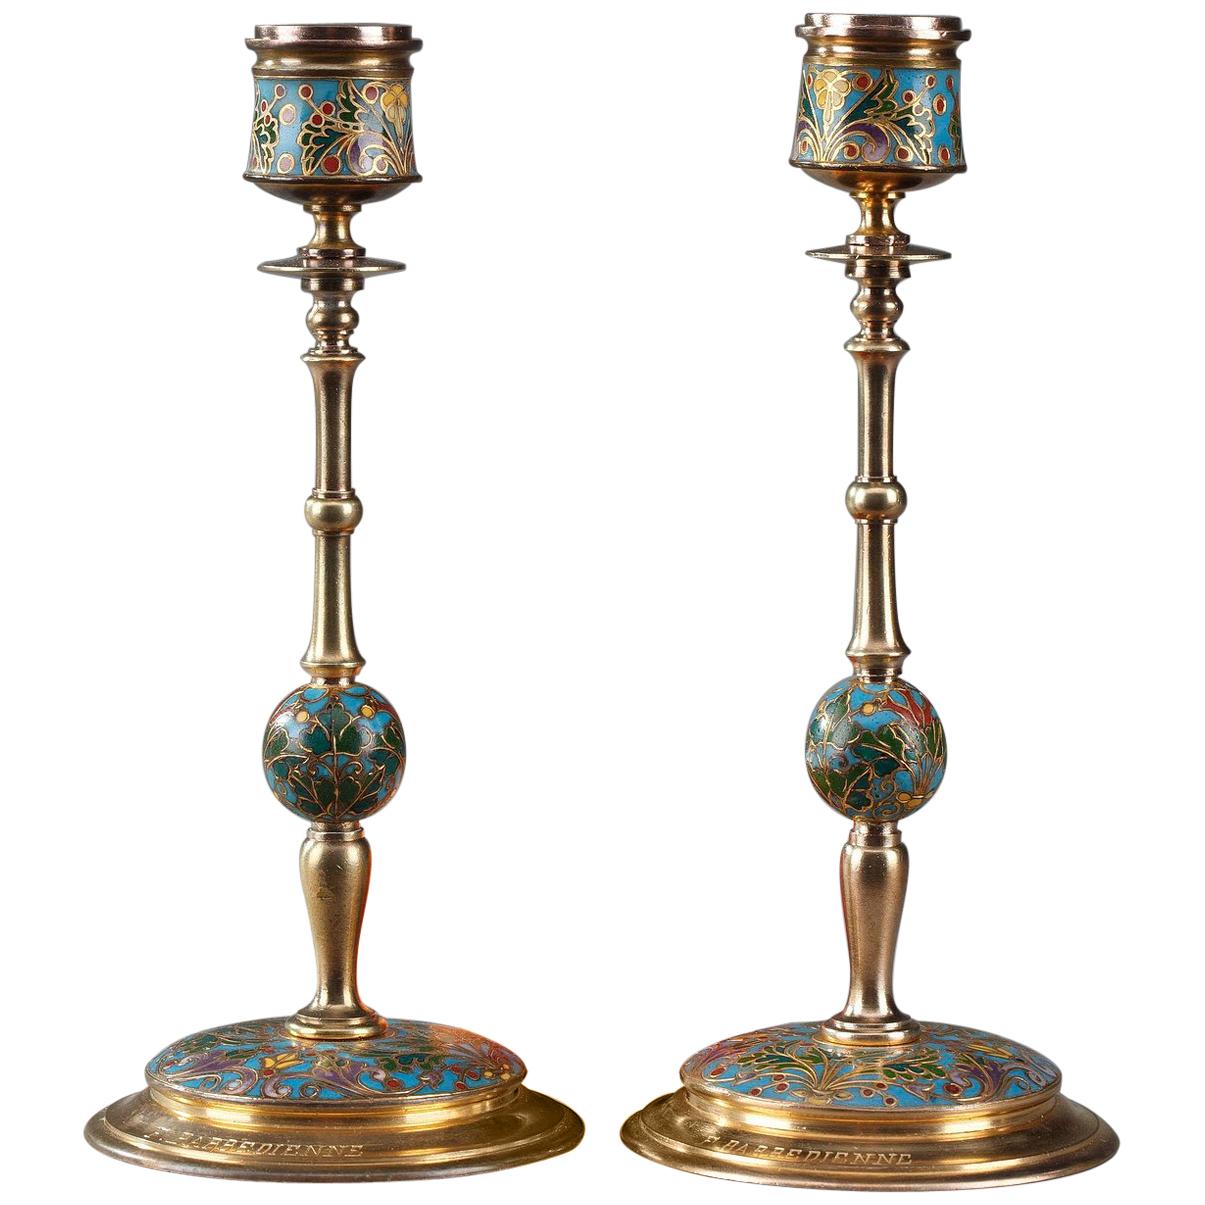 Pair of Gilt Bronze and Champleve Enameled Candlesticks by Barbedienne